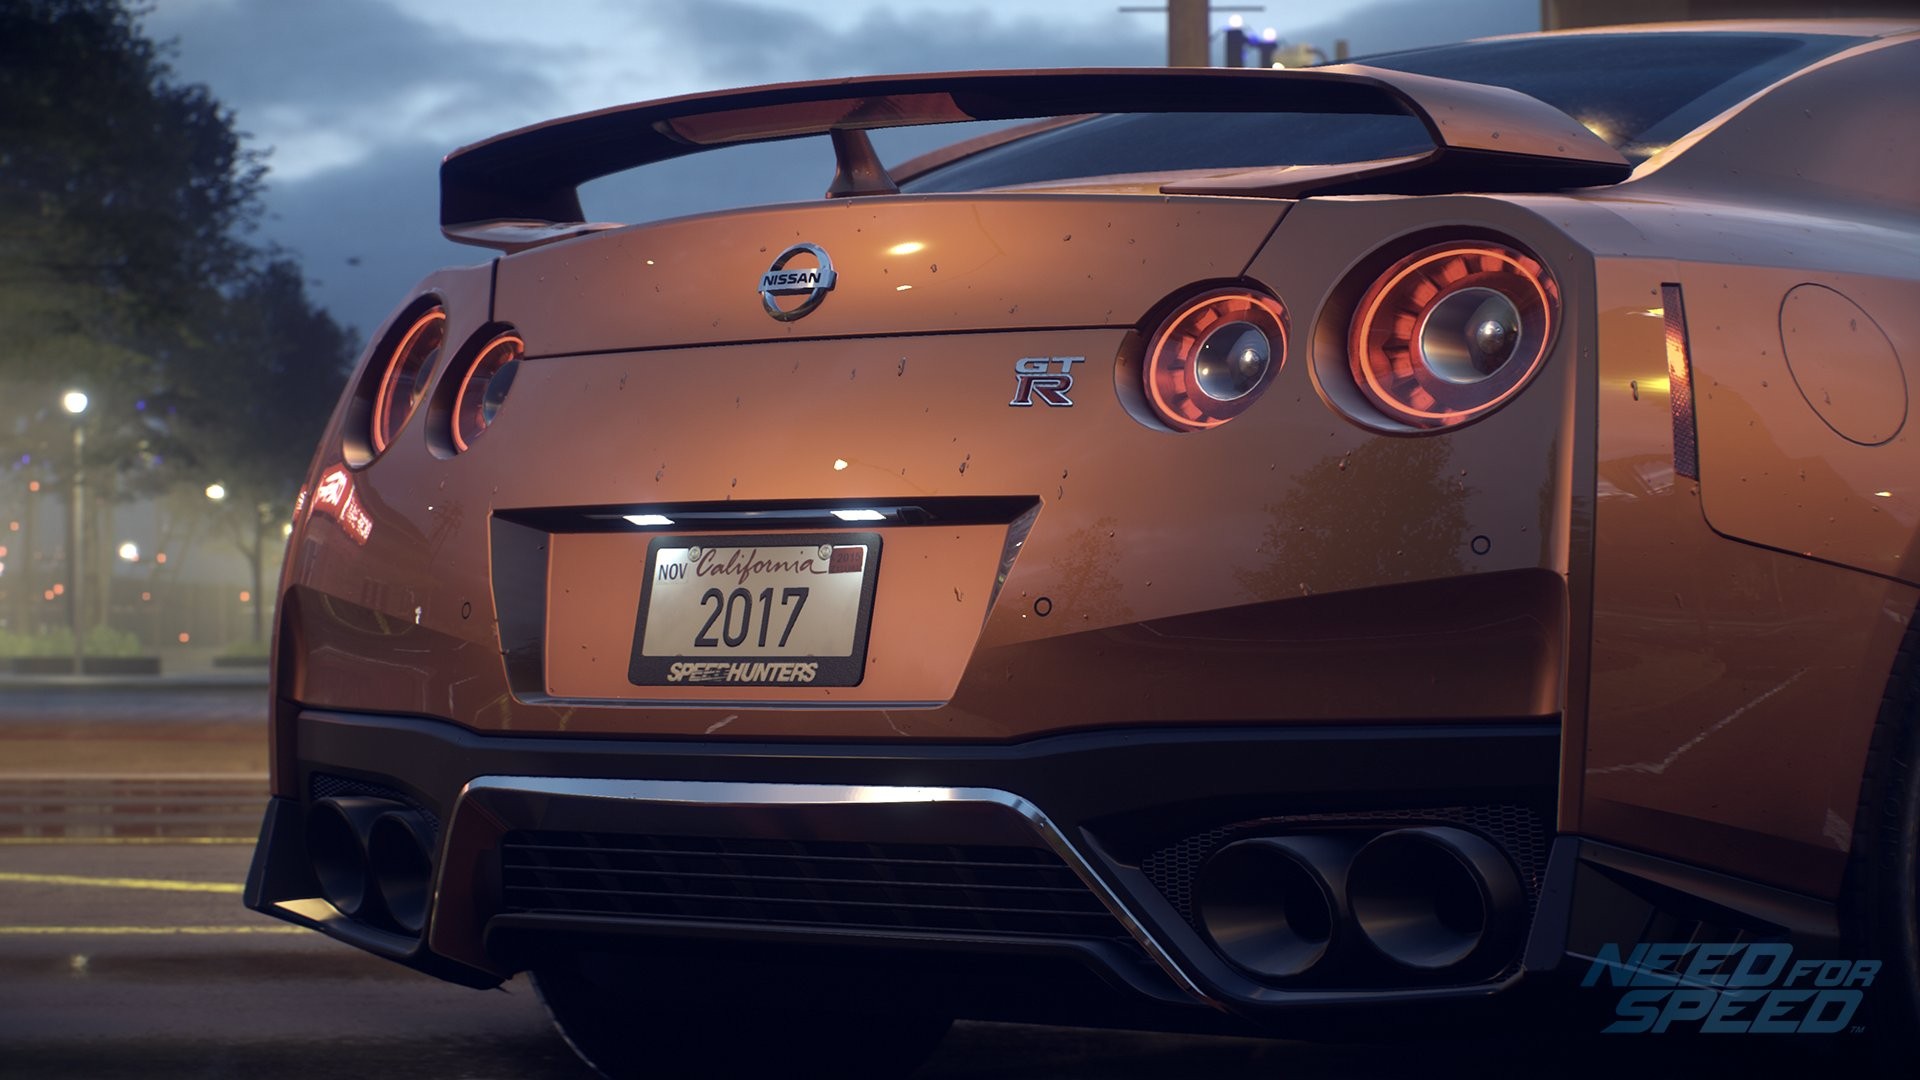 need For Speed 2016, Need For Speed, Car, PC Gaming, Nissan, Nissan GTR